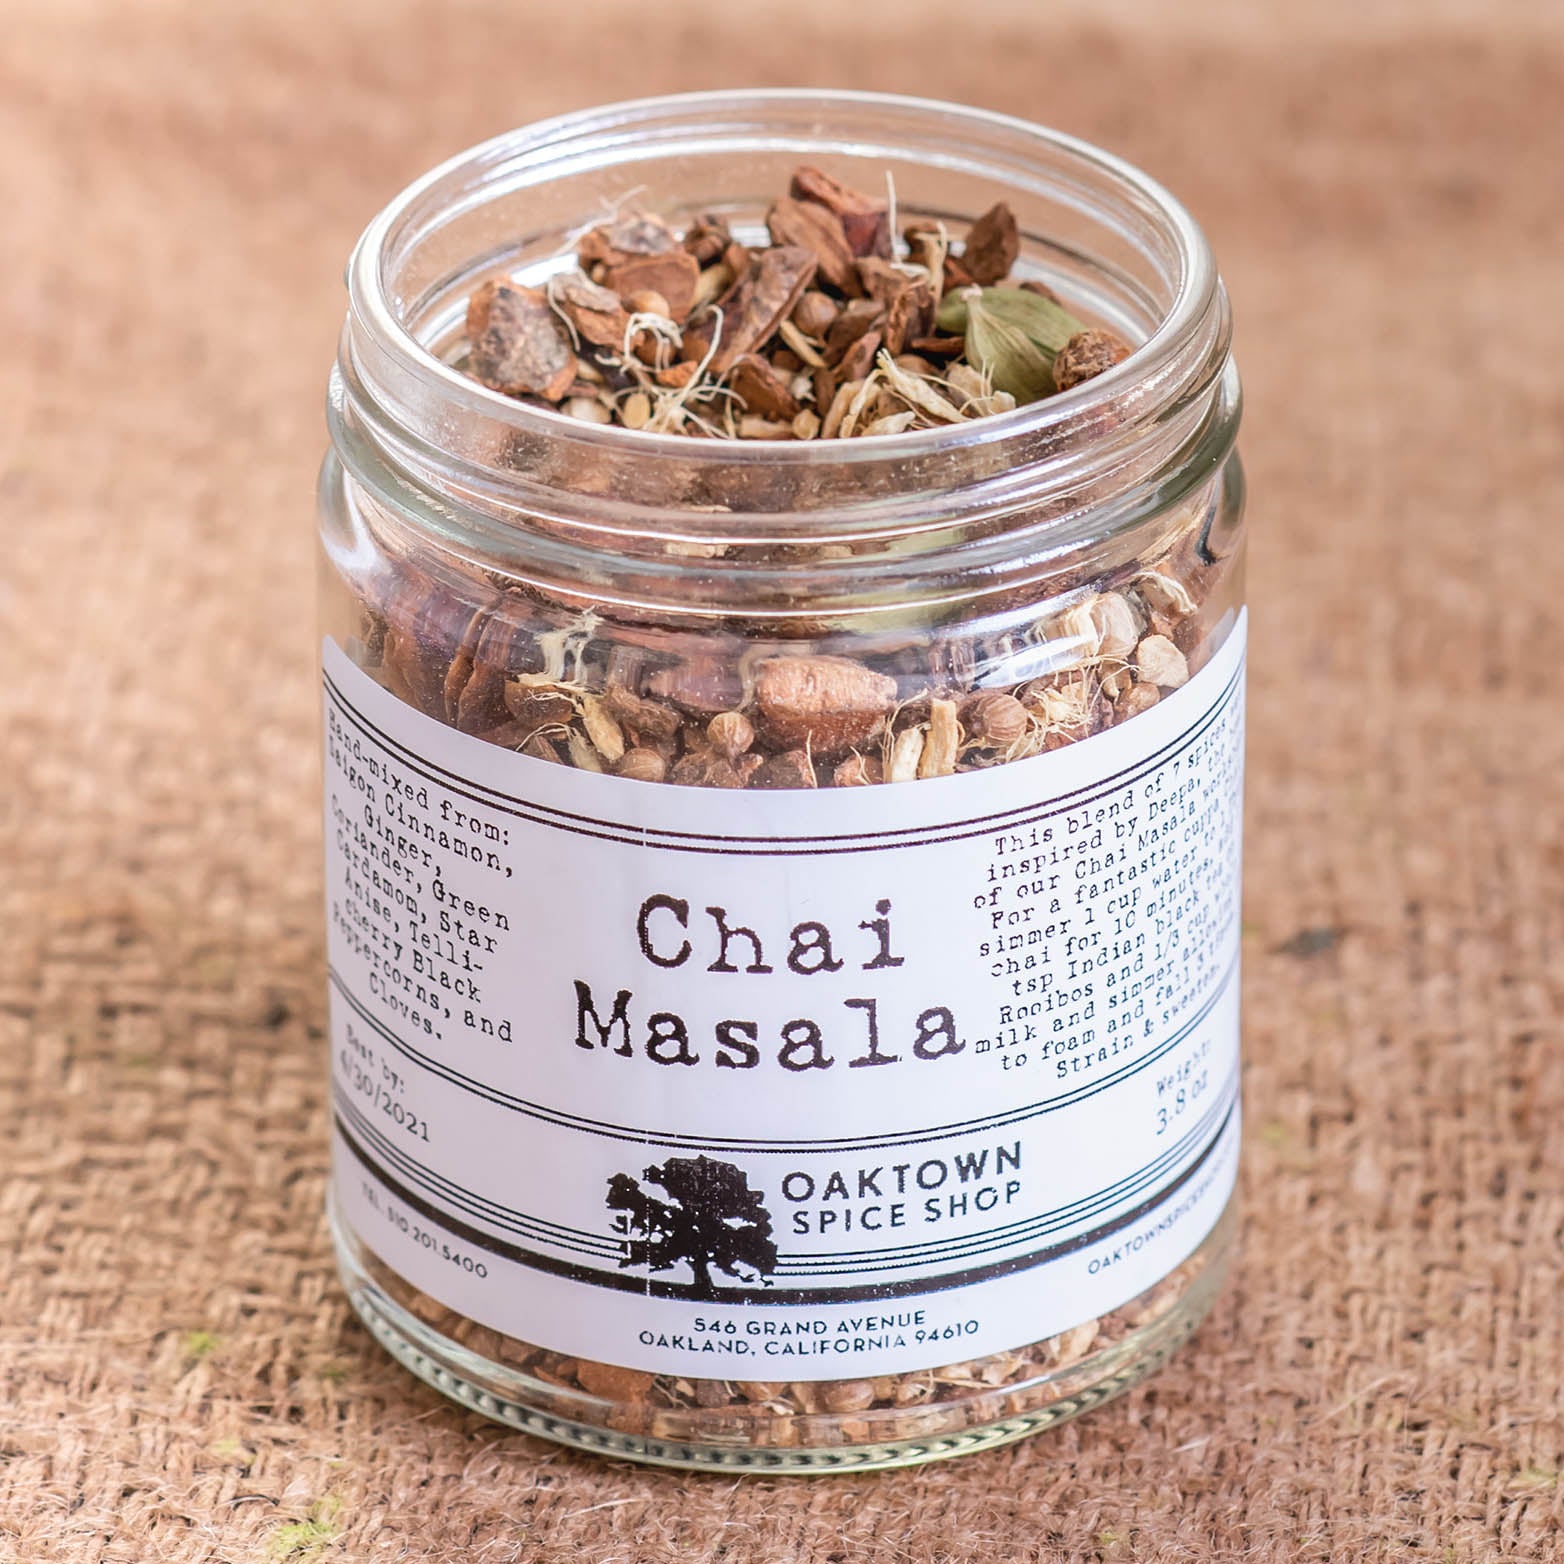 Chai Masala in 1 Cup Bag or Jar from $9.00 | Oaktown Spice Shop